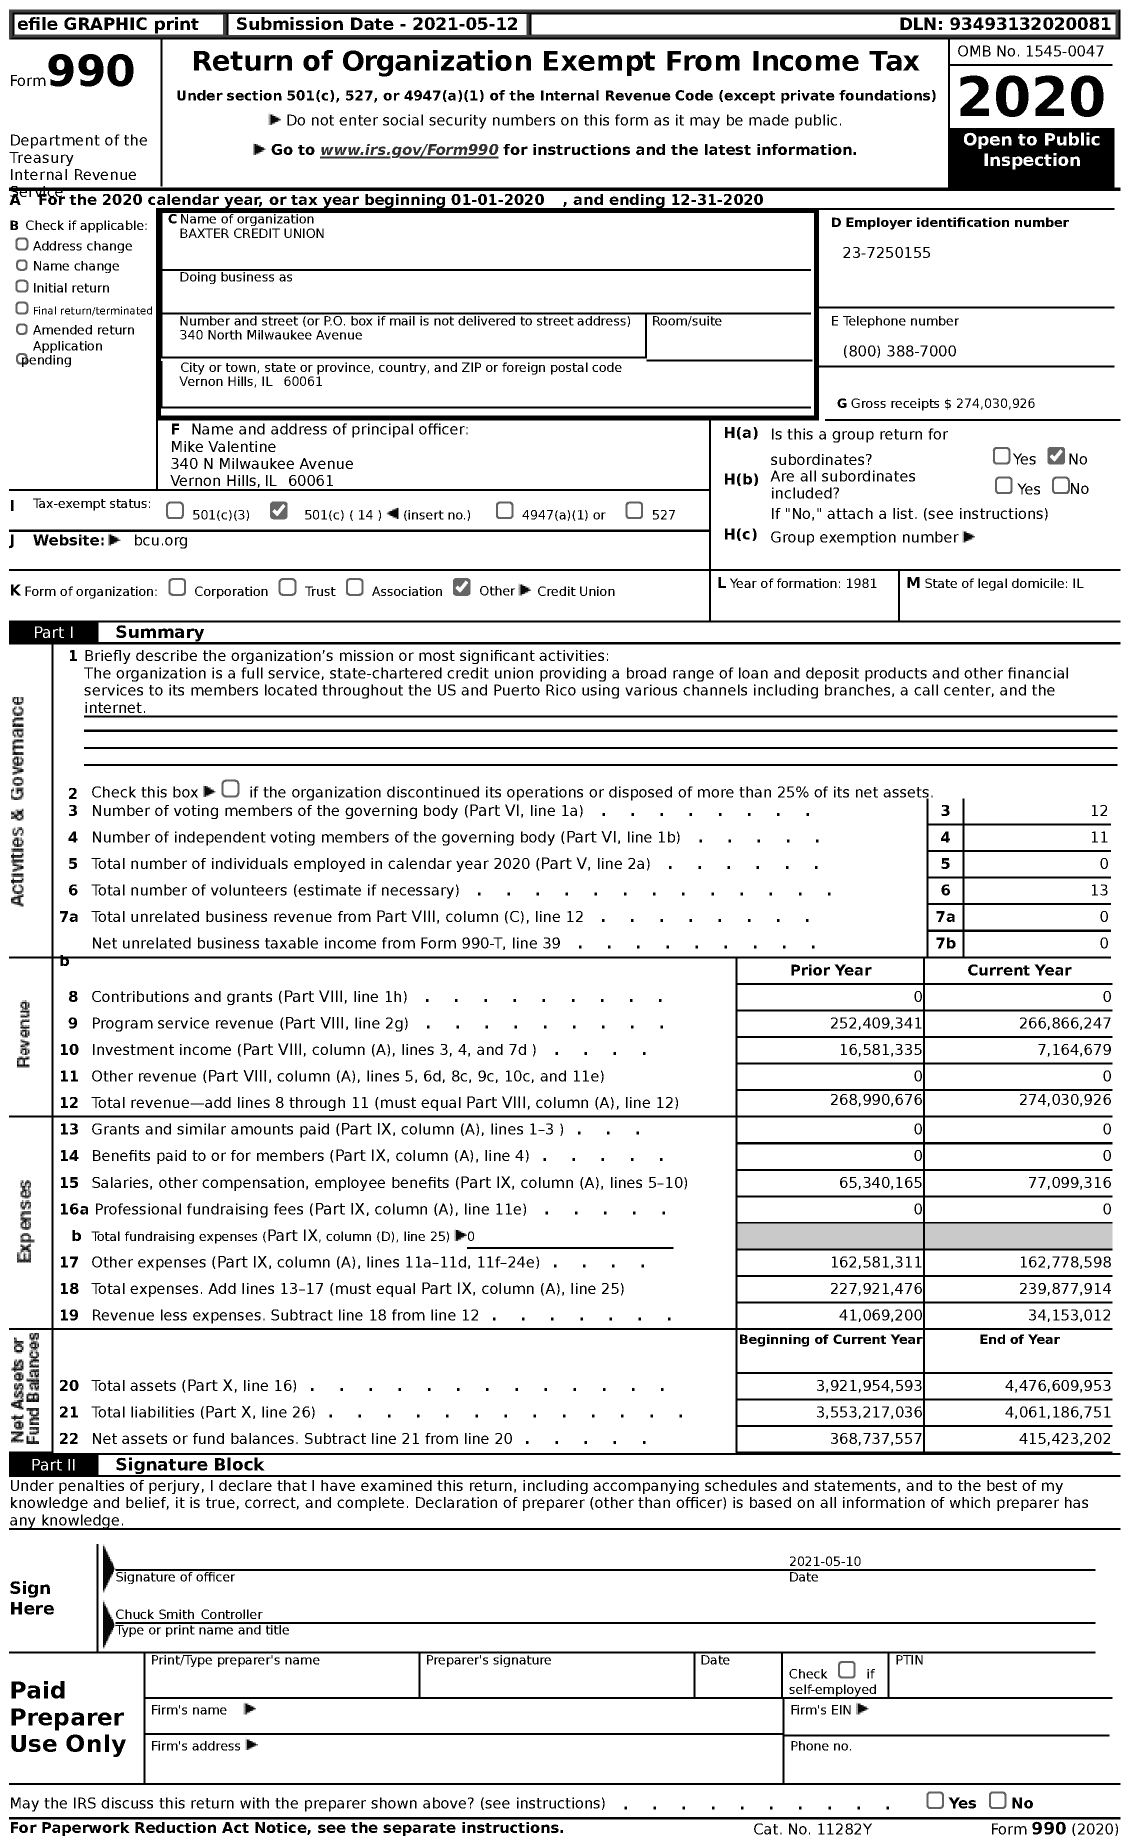 Image of first page of 2020 Form 990 for Baxter Credit Union